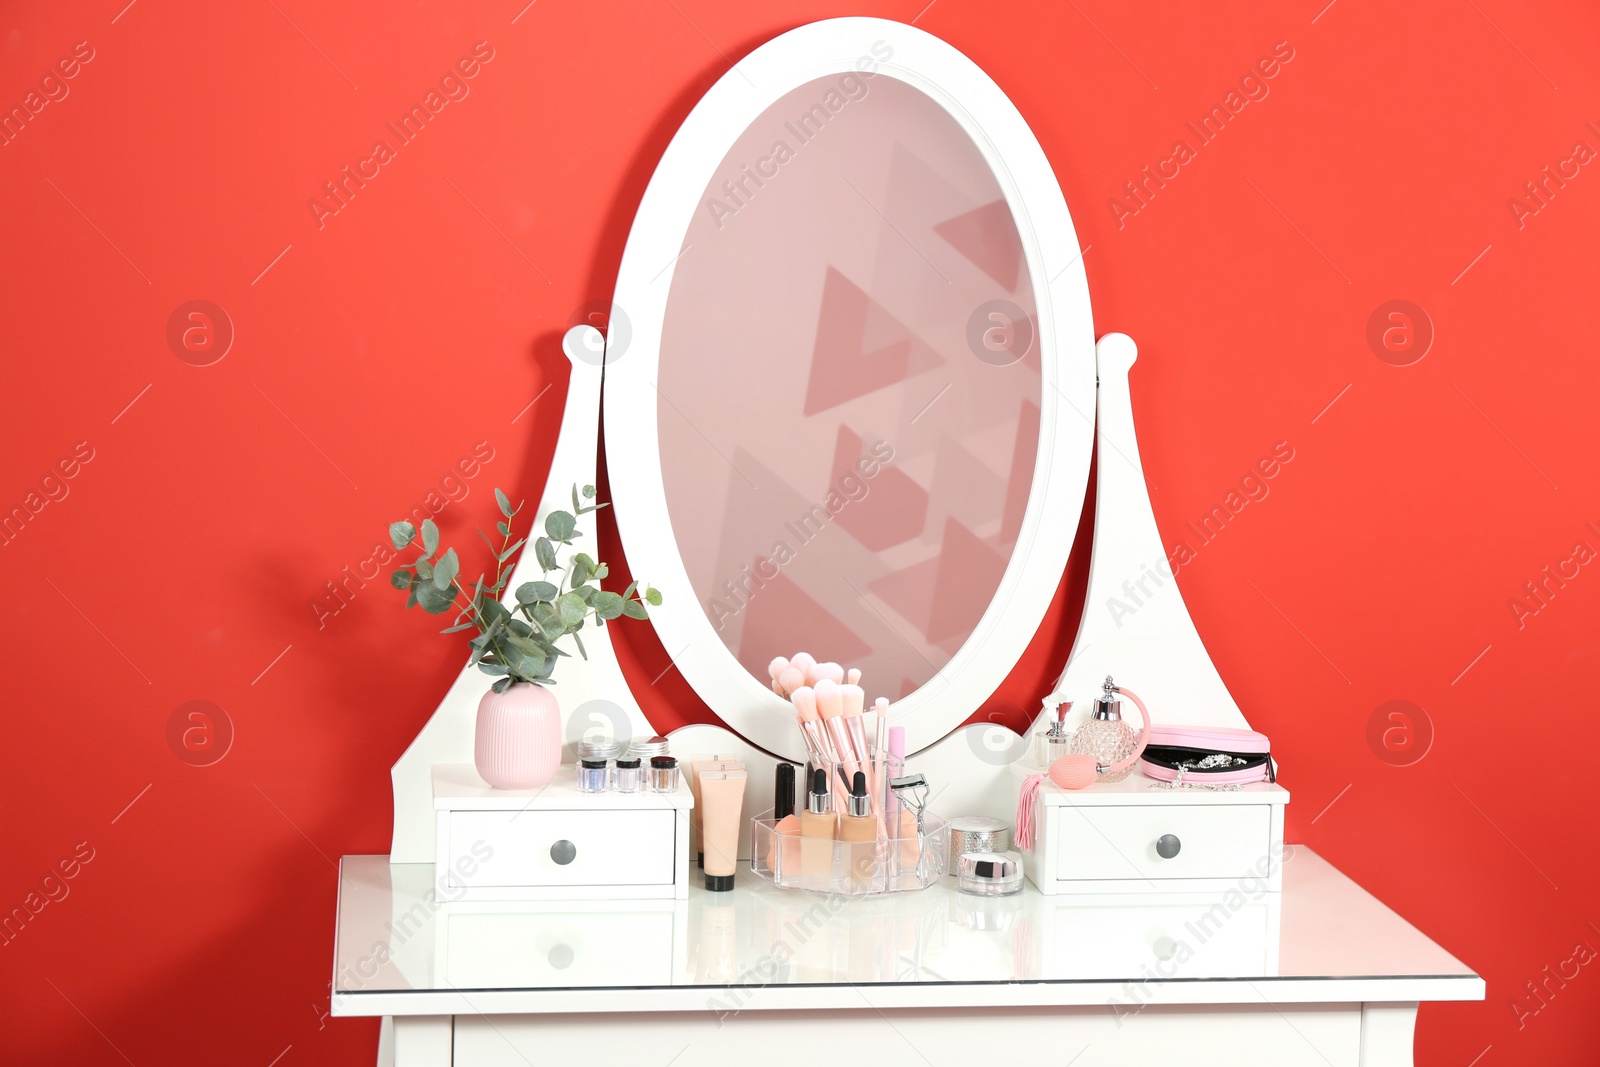 Photo of Dressing table with mirror and makeup products near red wall